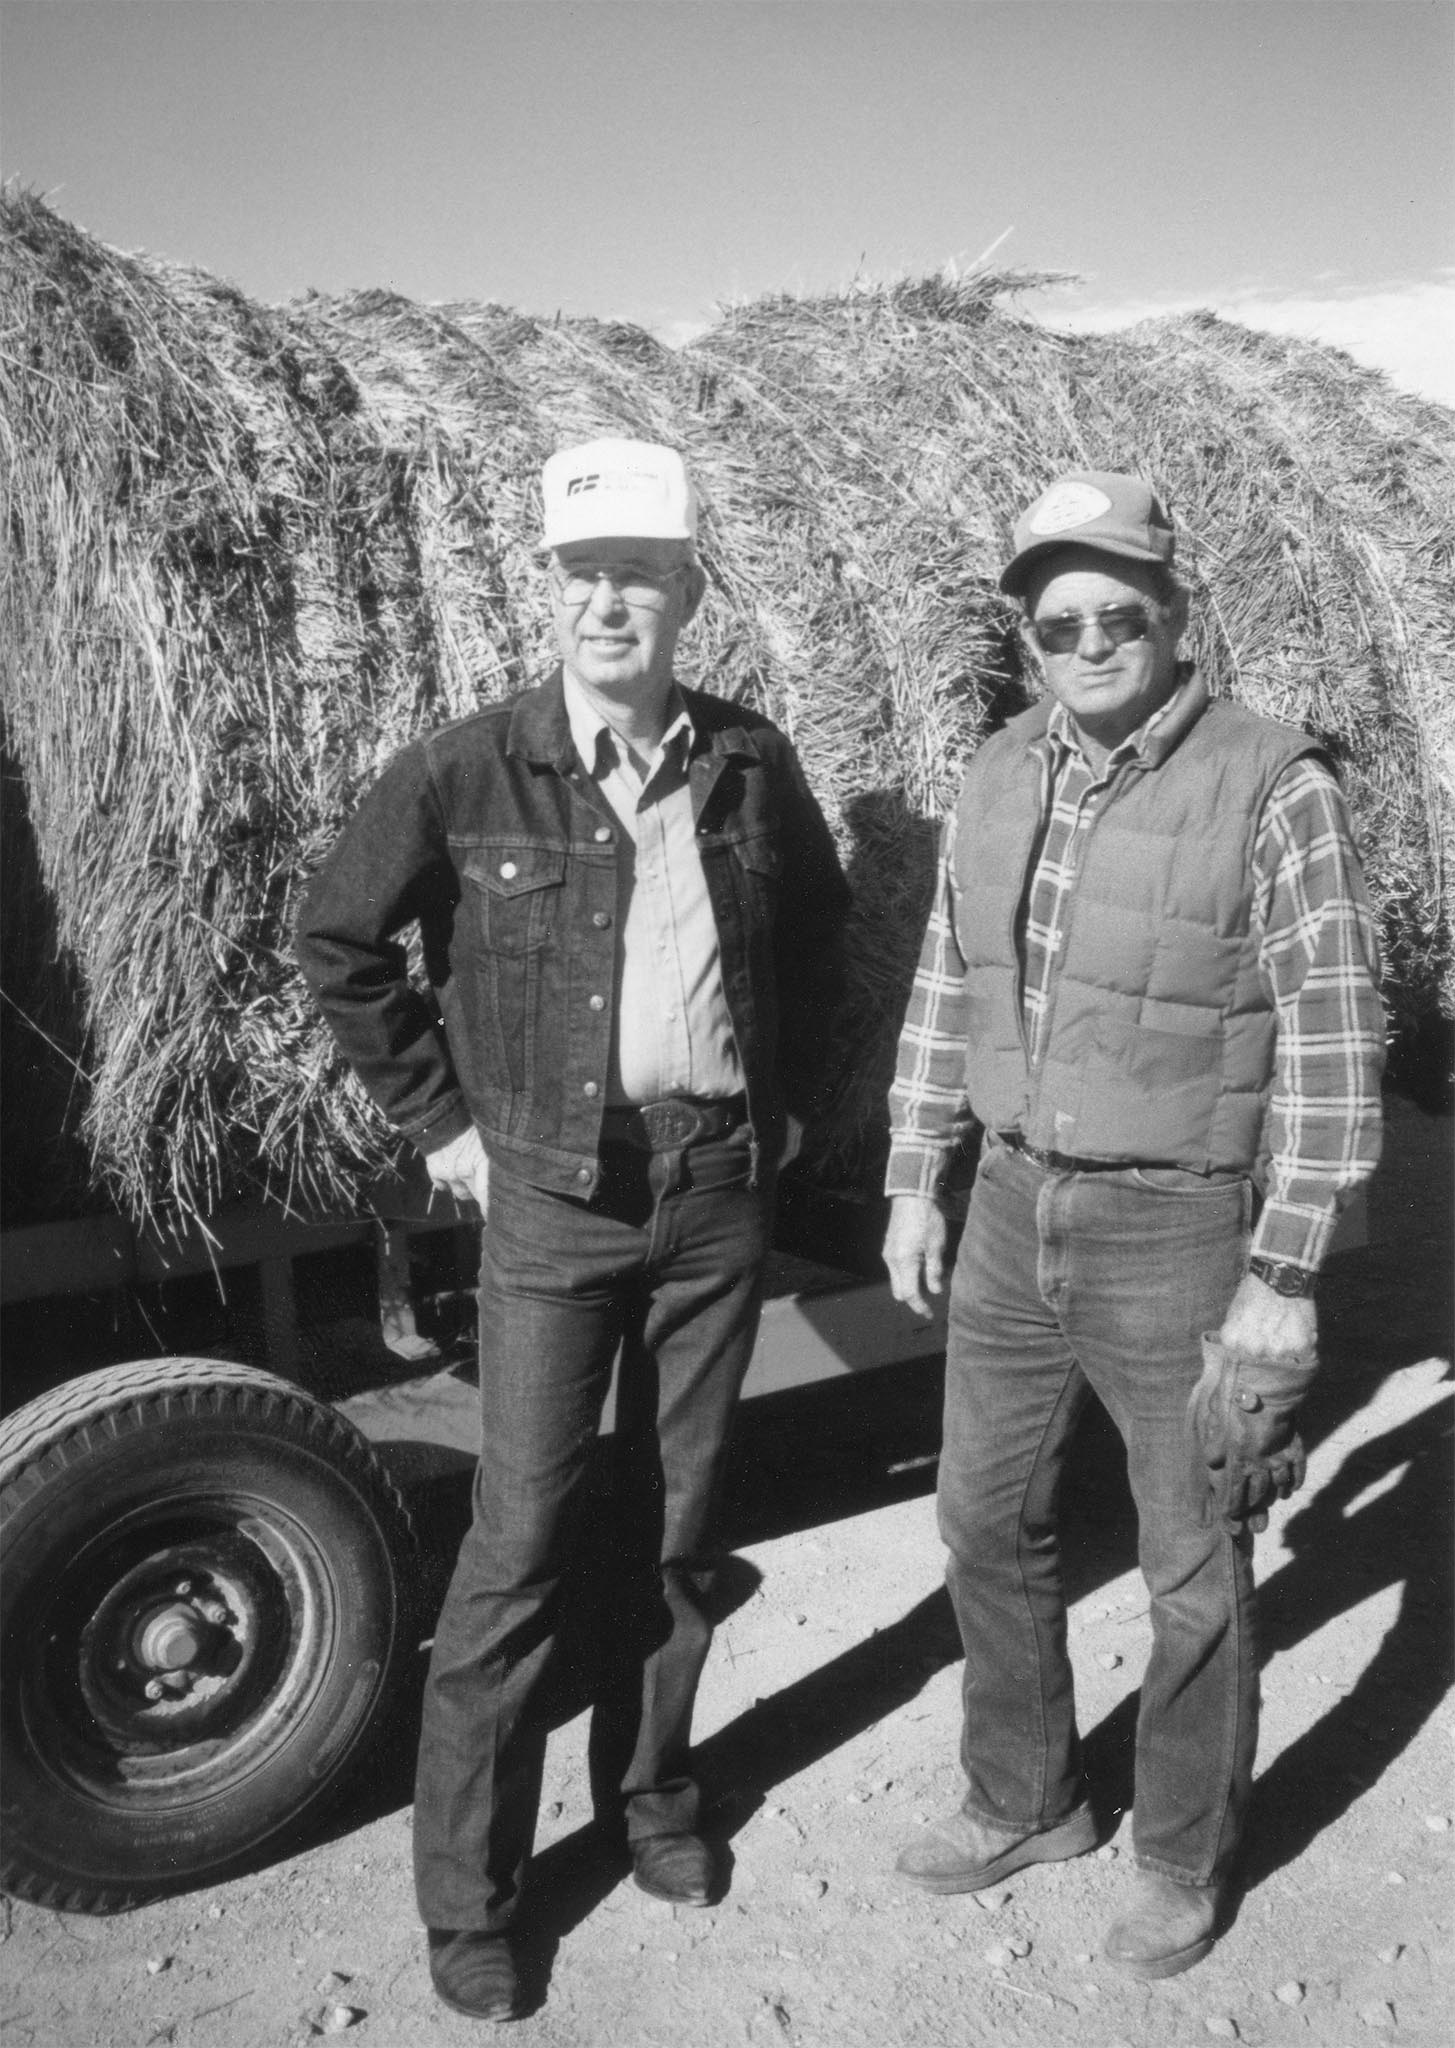 In 1990, about 100 Oklahoma farmers and ranchers donated more than 300 tons of hay to drought-stricken parts of south Texas. The donations came as a result of the “South Texas Haylift,” a cooperative effort among Farm Bureau members that grew to encompass even non-members. Shown here, Logan County Farm Bureau President Bill Kinney (left) and Vice President Oliver Rudd watch donated hay being loaded onto railcars as they stand in front of a trailer waiting to be unloaded. The hay was loaded on the railcars at the Marshall Co-op and the Guthrie Santa Fe depot and routed to Texas cattlemen in Bexar, Atascoas and Victoria counties, where accumulated rainfall was less than 12 inches in the previous two years.